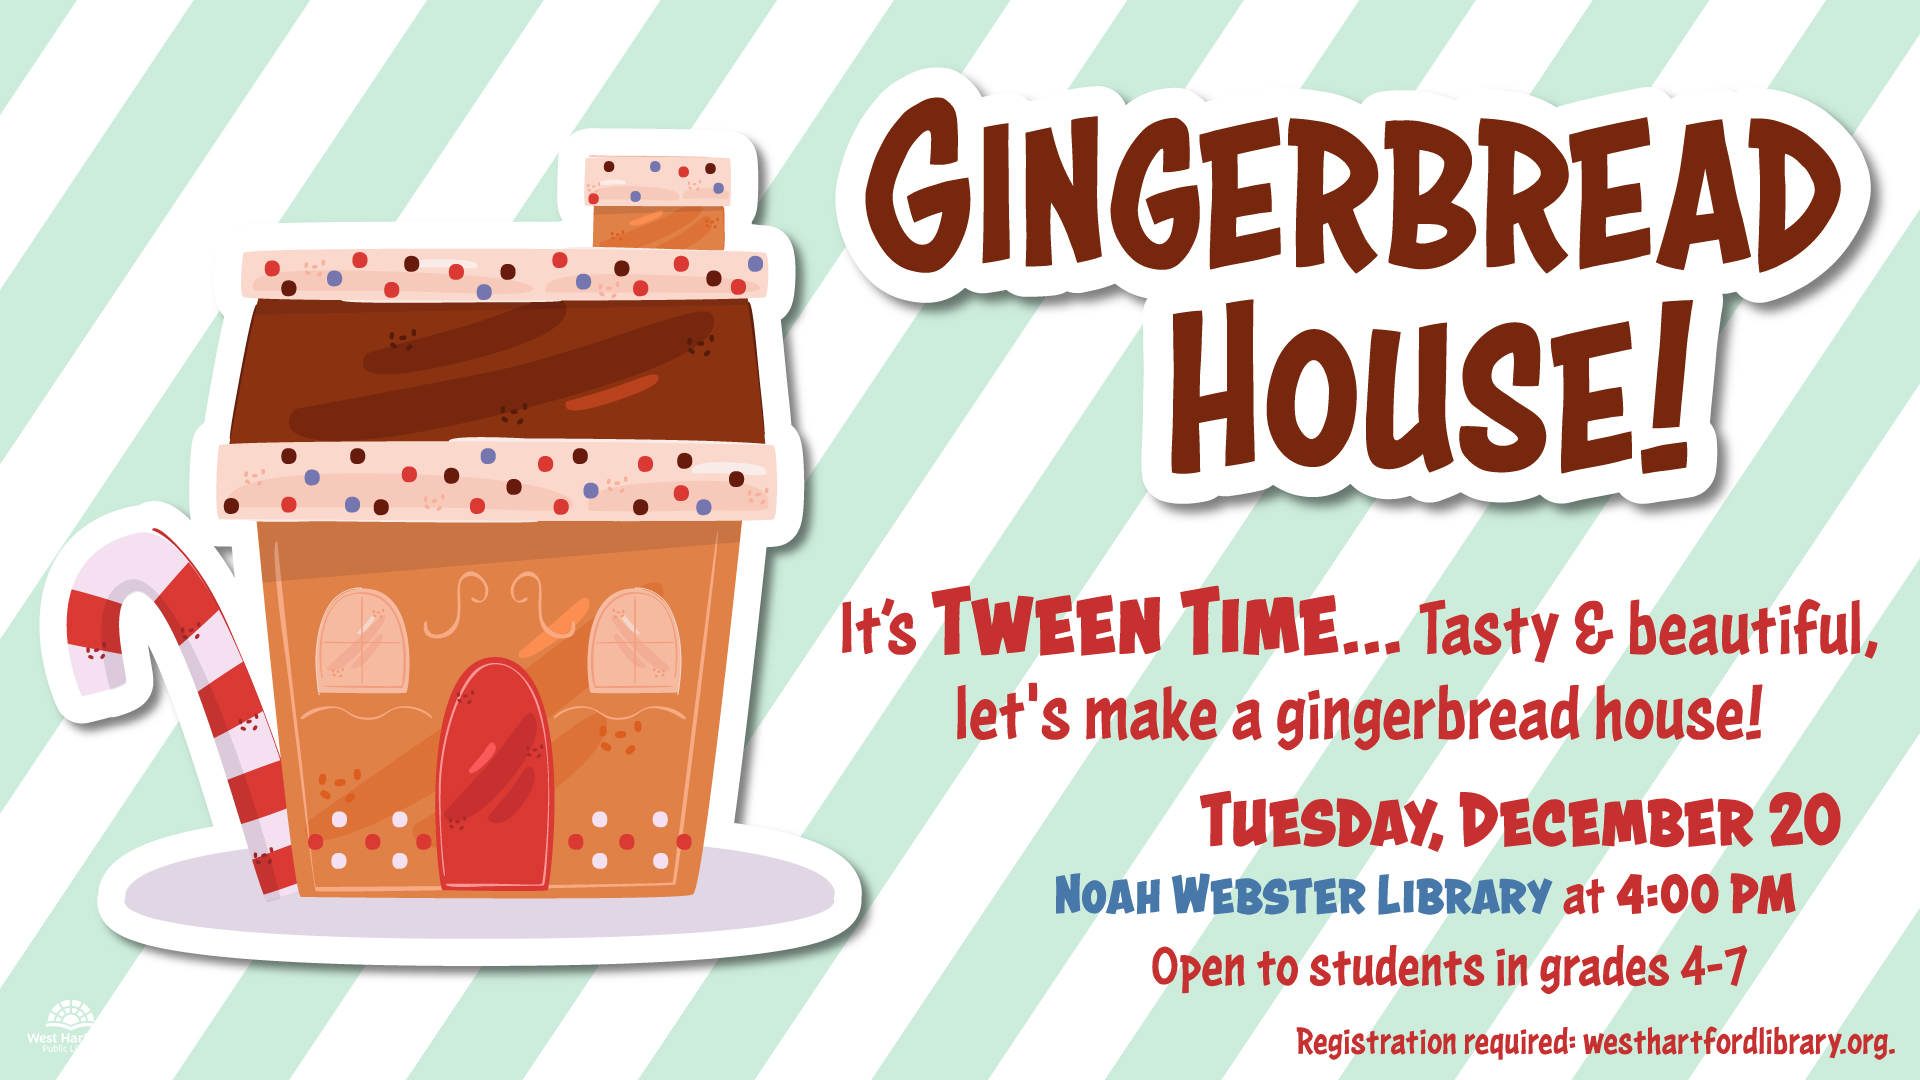 Tween Tuesdays - image of Gingerbread House flyer